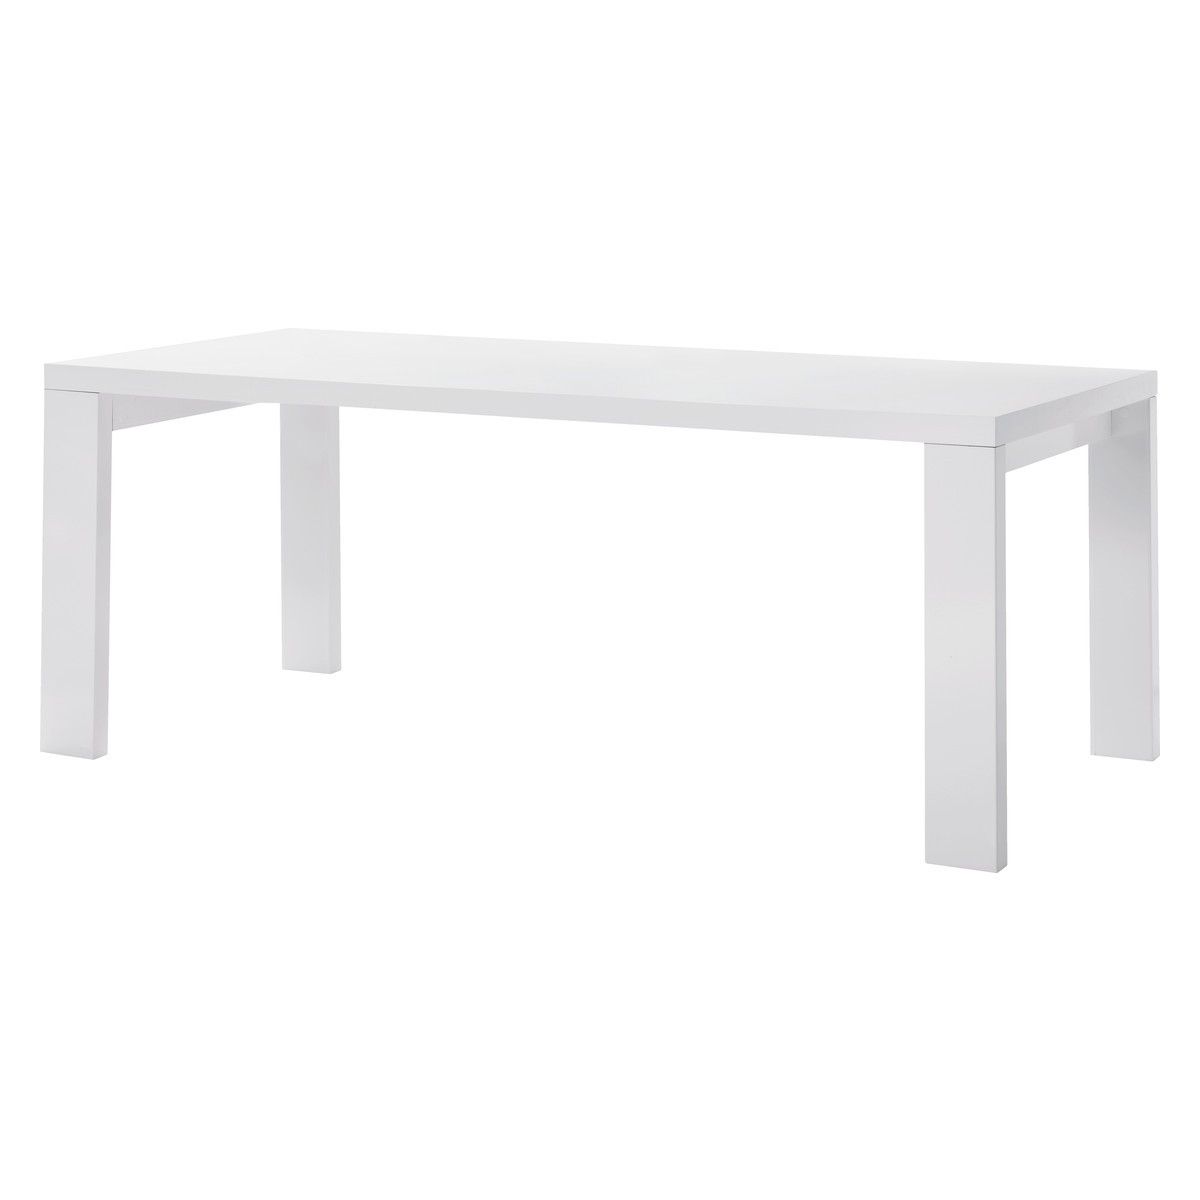 Newest Asper 8 Seater White High Gloss Dining Table (View 6 of 25)